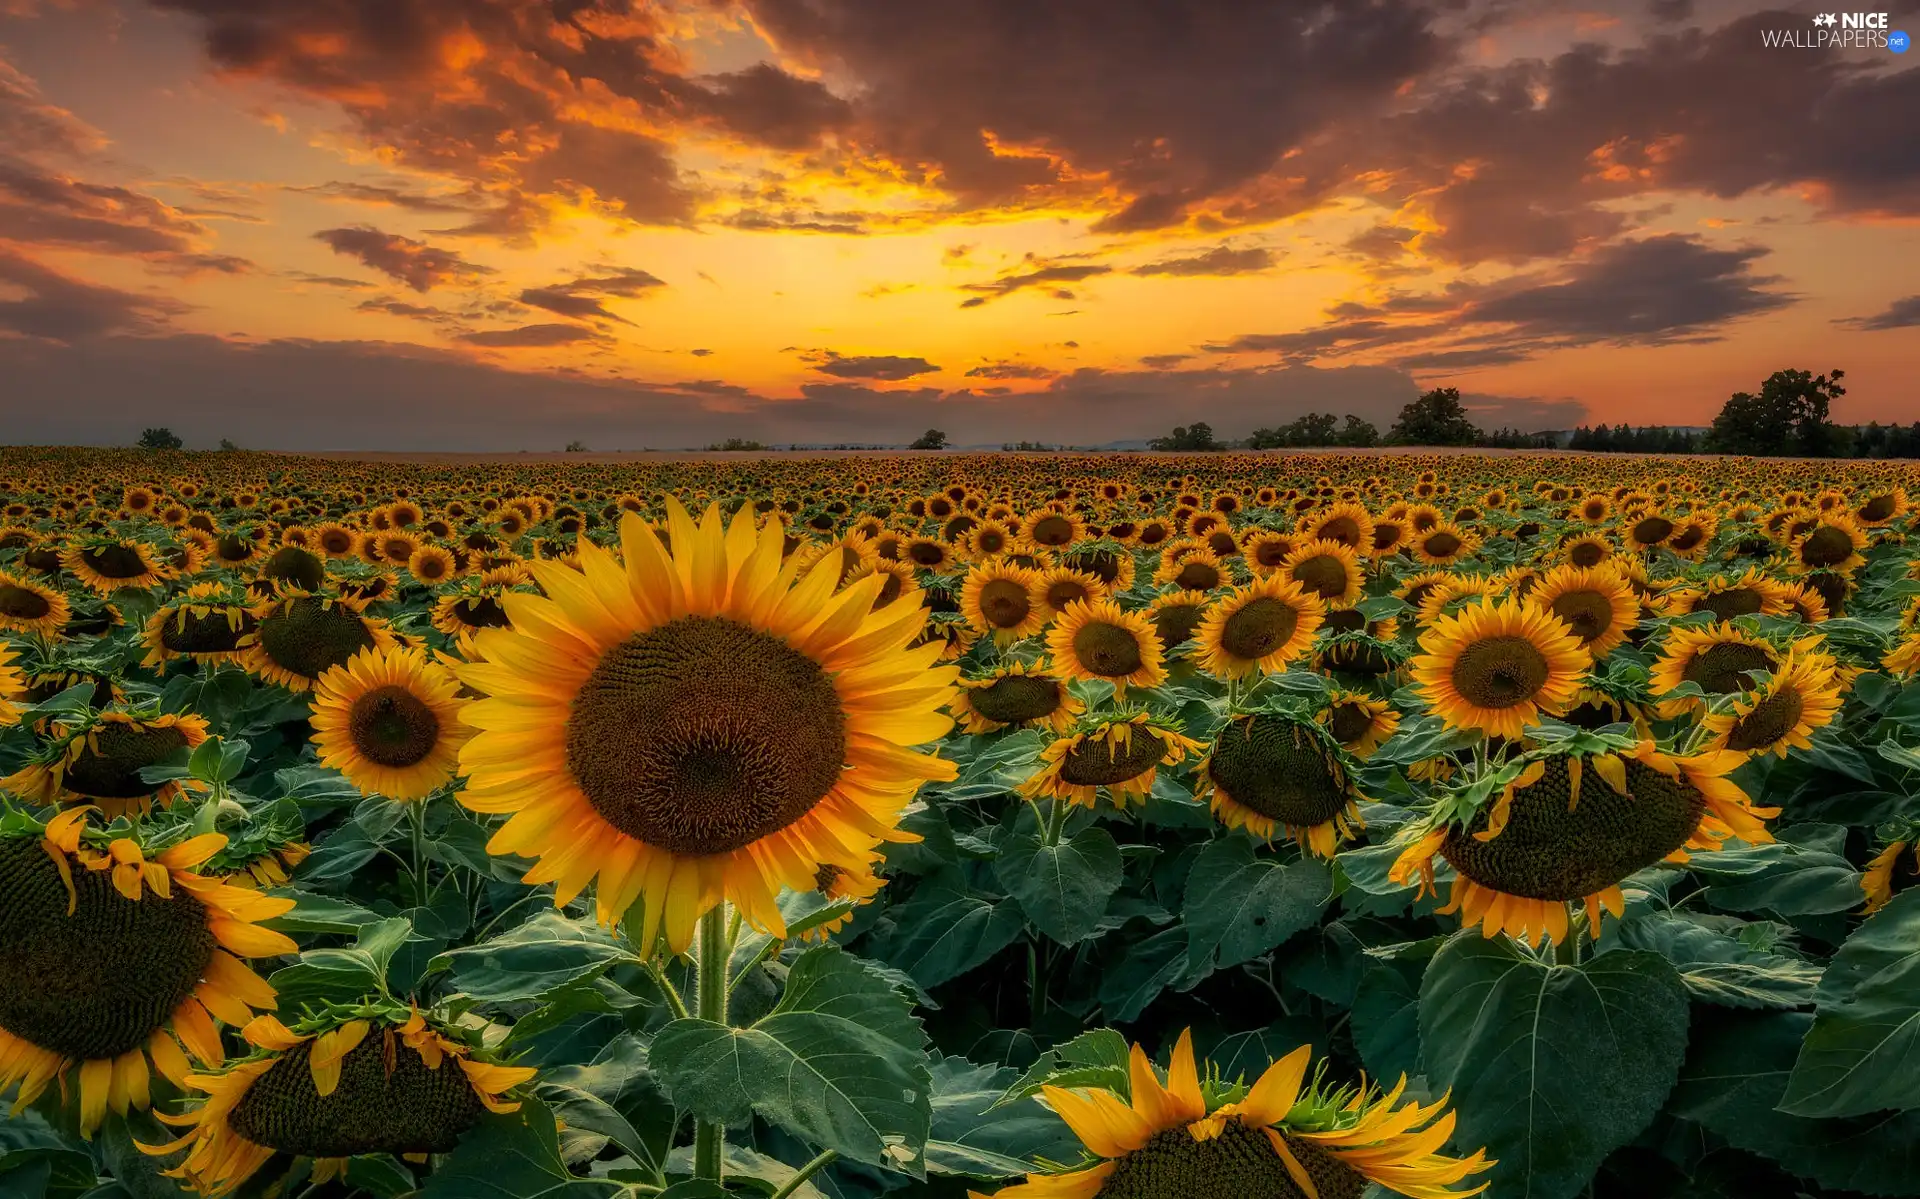 trees, Field, Great Sunsets, clouds, viewes, Nice sunflowers